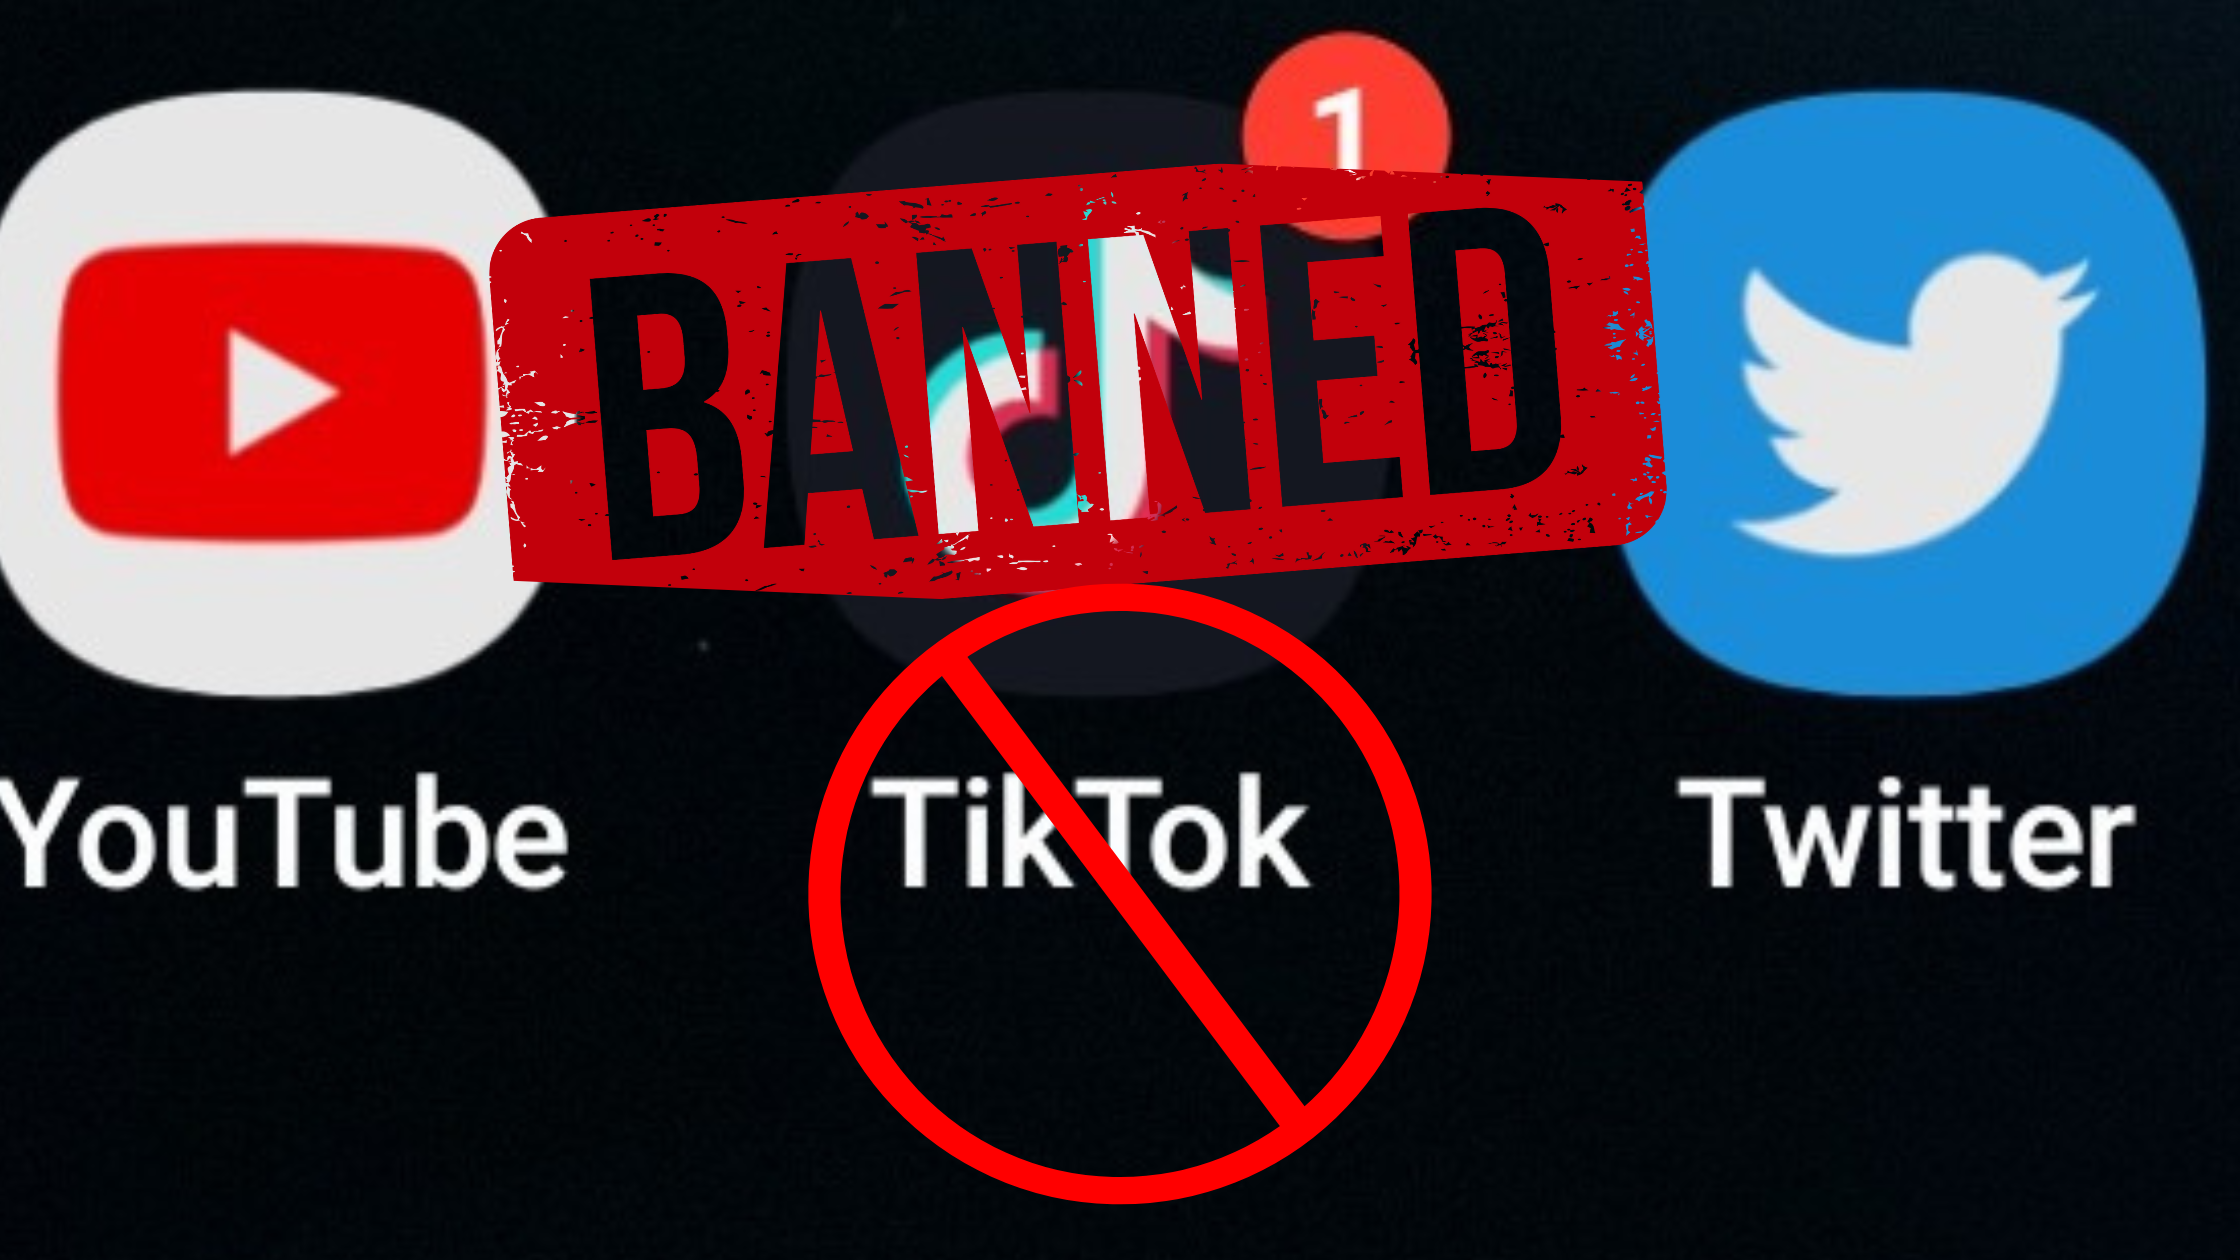 TikTok to be Banned? A Creator’s View